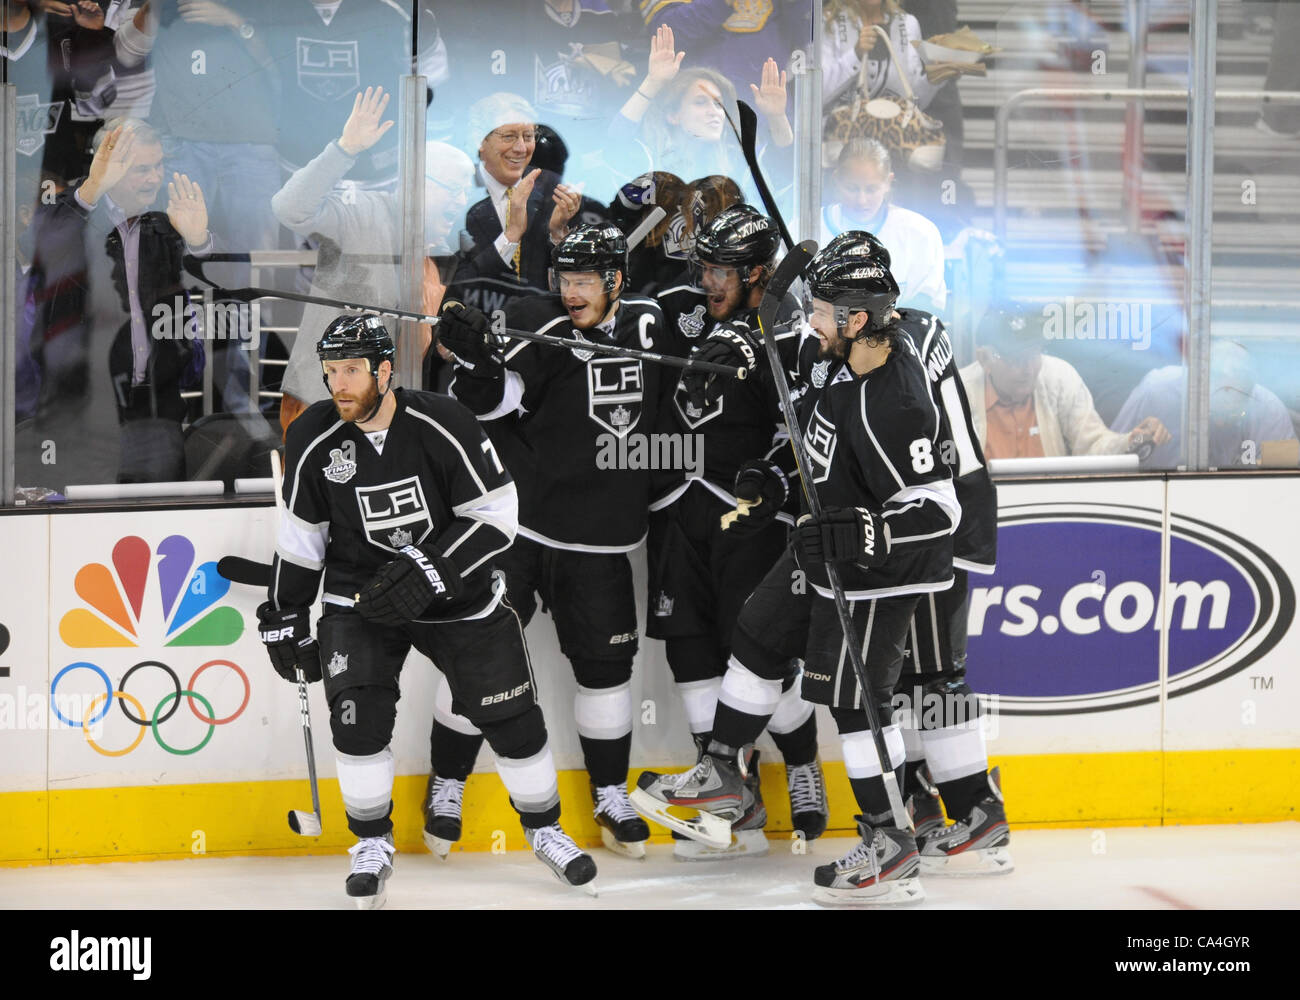 o4.06.2012. Staples Center, Los Angles, California.  The LA Kings celebrate their second goal of the game during game 3 of the Stanley Cup Final between the New Jersey Devils and the Los Angeles Kings at the Staples Center in Los Angeles, CA. Stock Photo